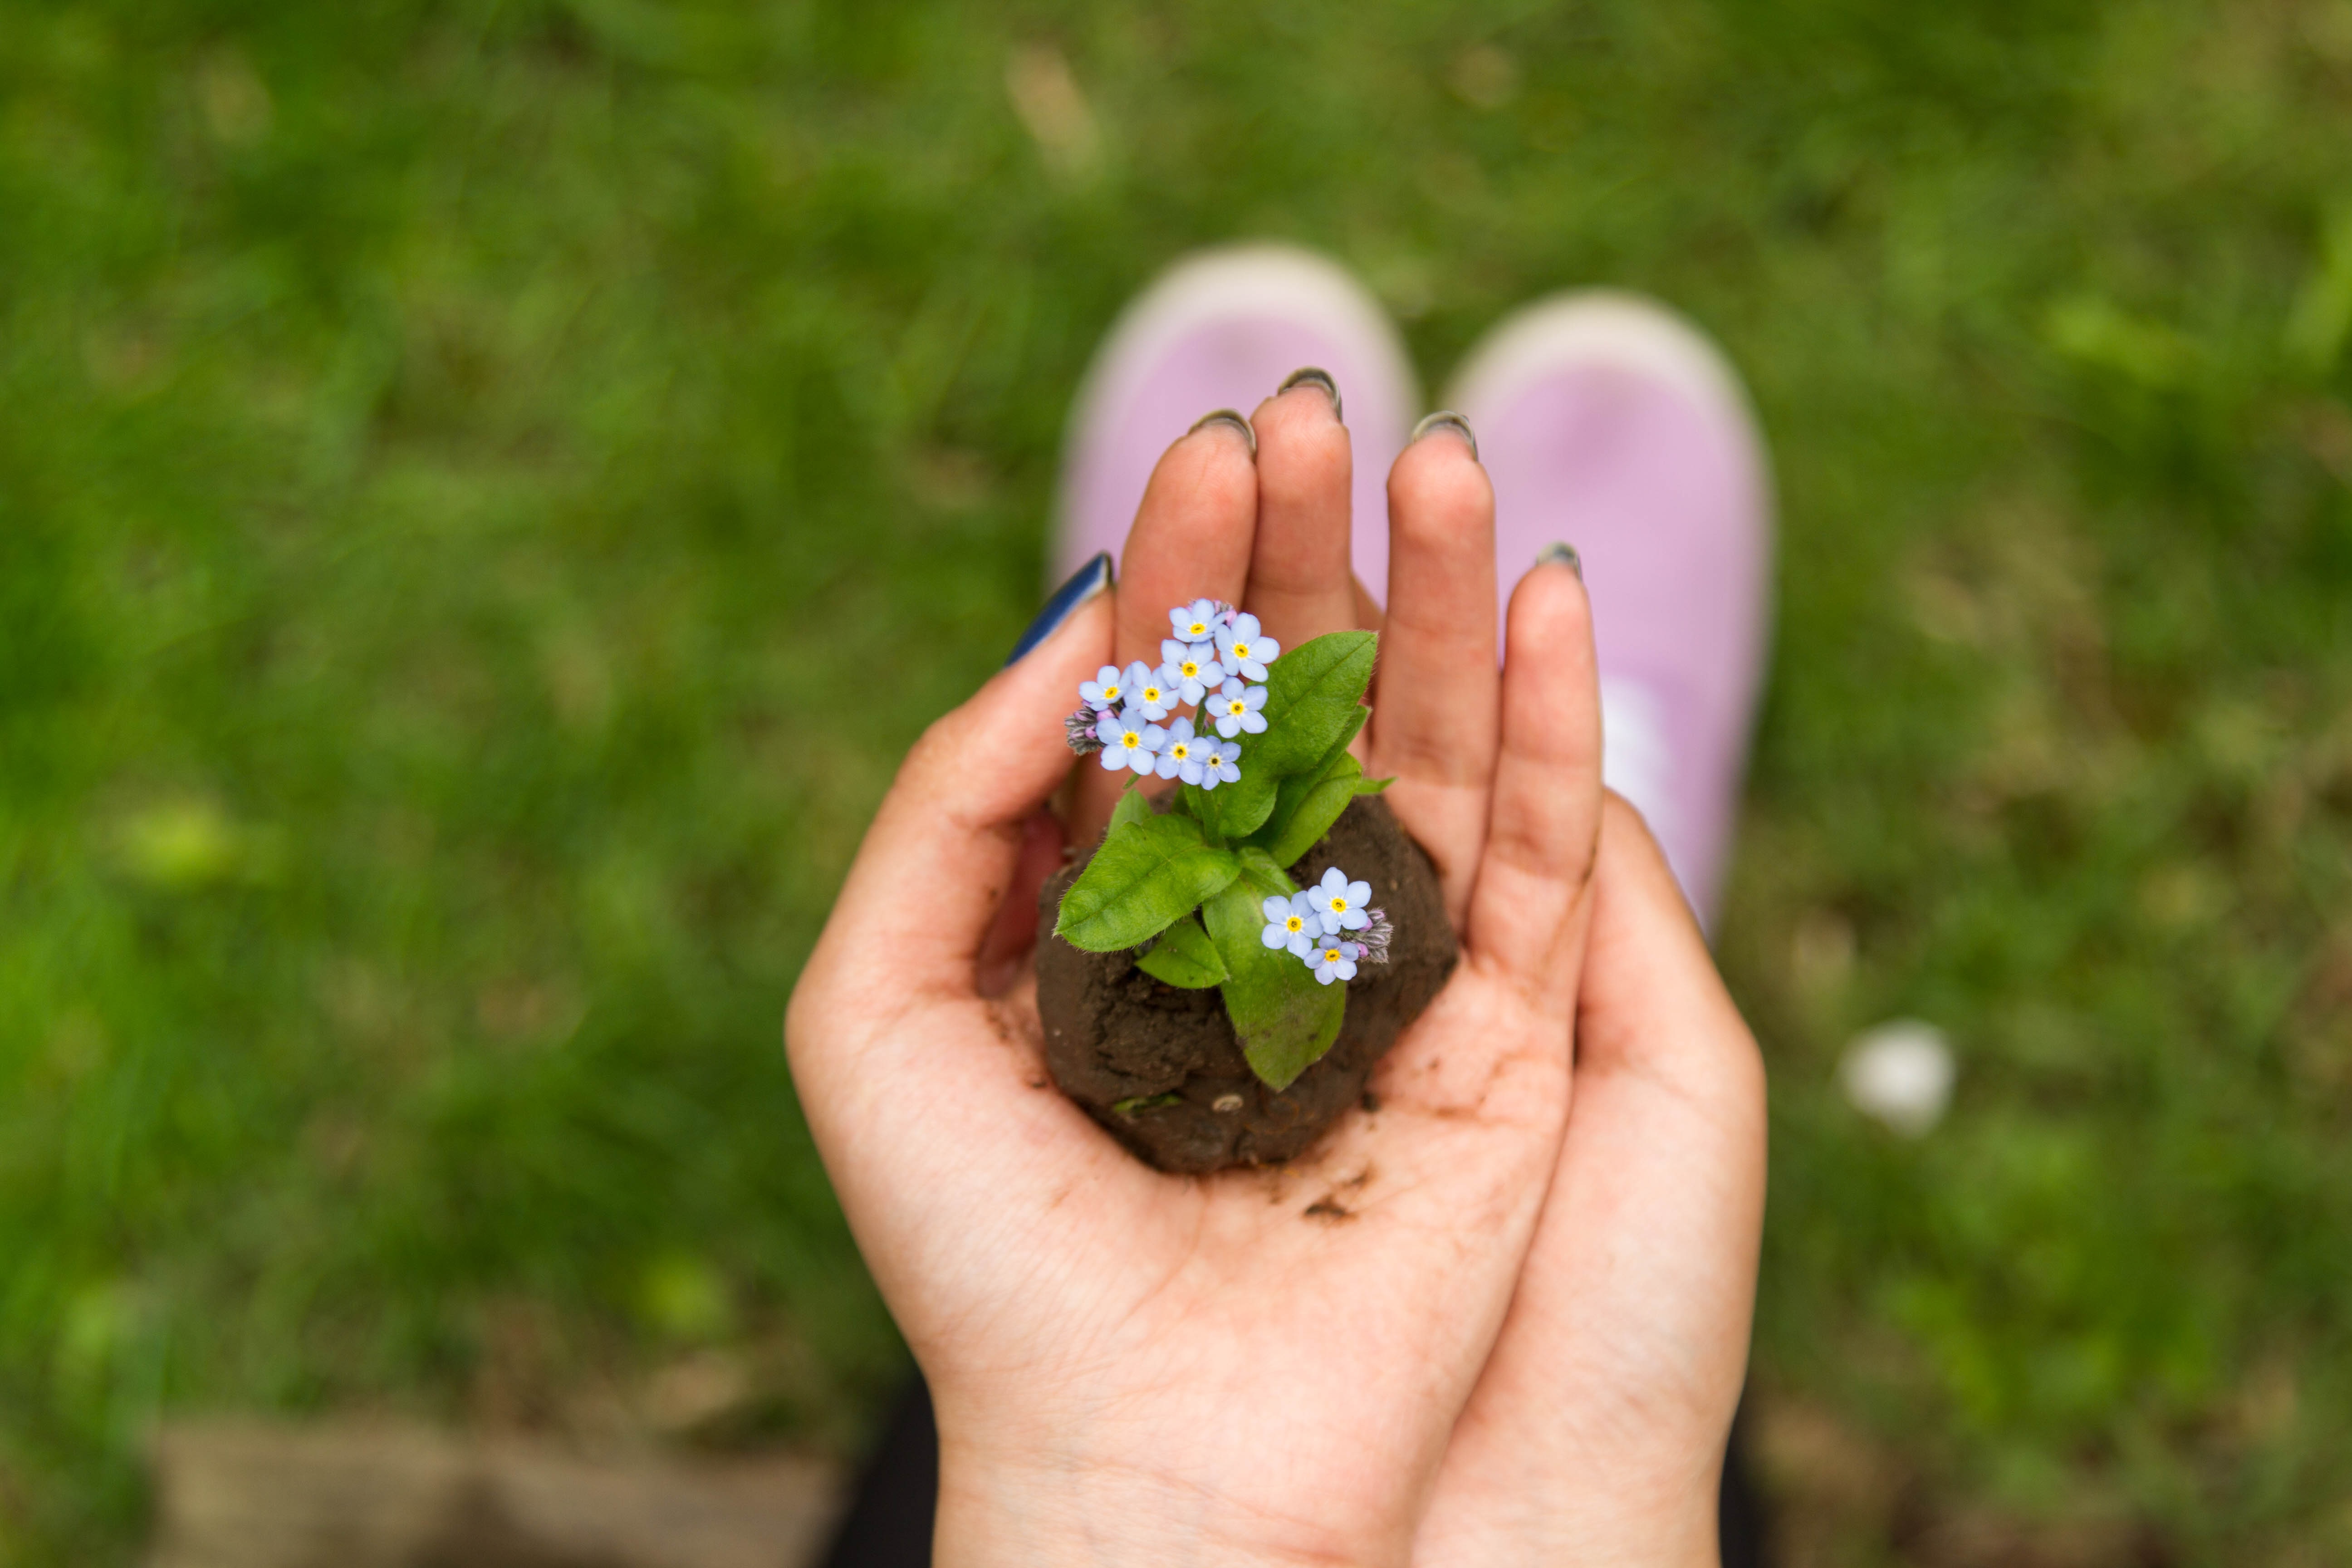 person holding green and white flower plant with soil during daytime